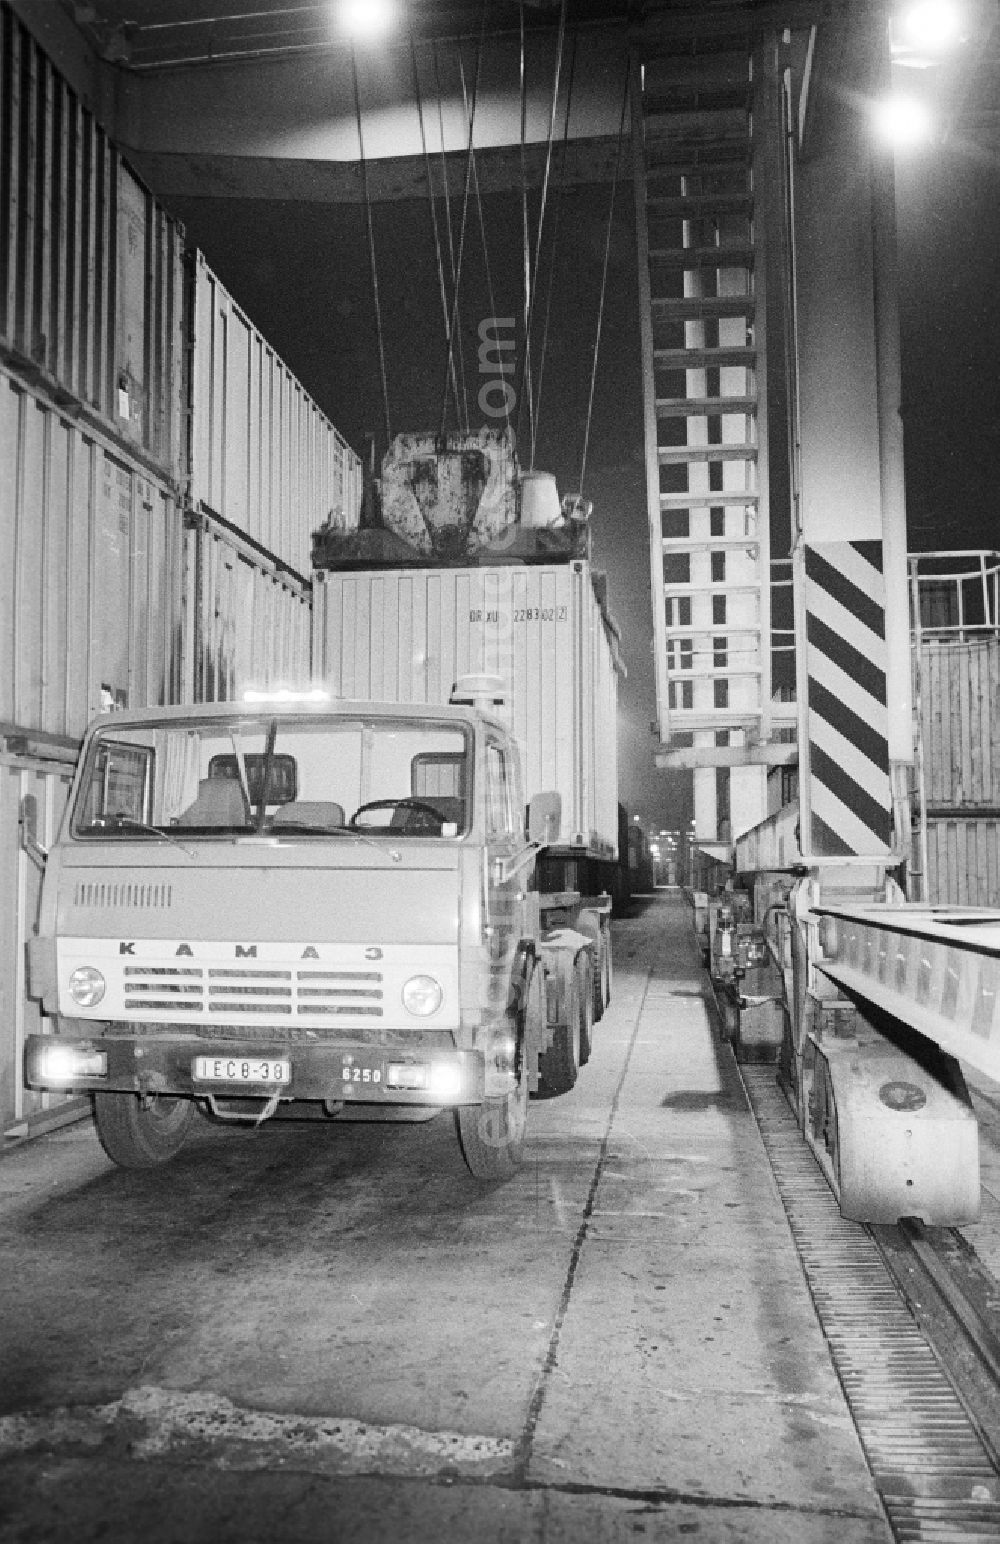 GDR image archive: Berlin - A truck will load with a container in the container terminal Frankfurt avenue in Berlin, the former capital of the GDR, German democratic republic